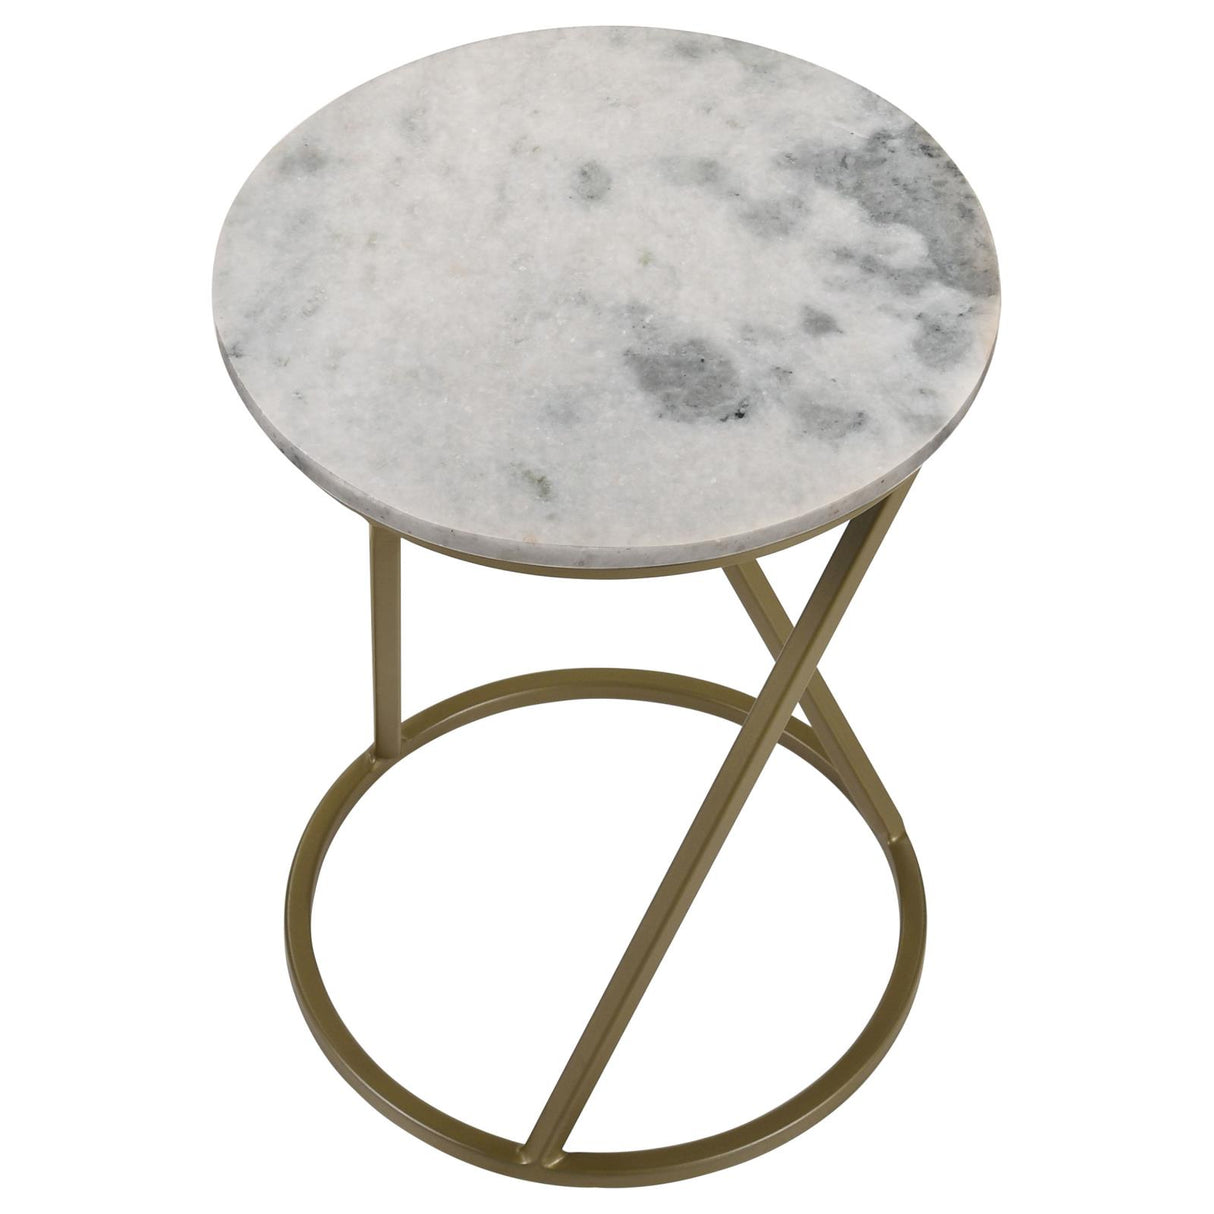 Malthe Round Accent Table with Marble Top White and Antique Gold - 959562 - Luna Furniture